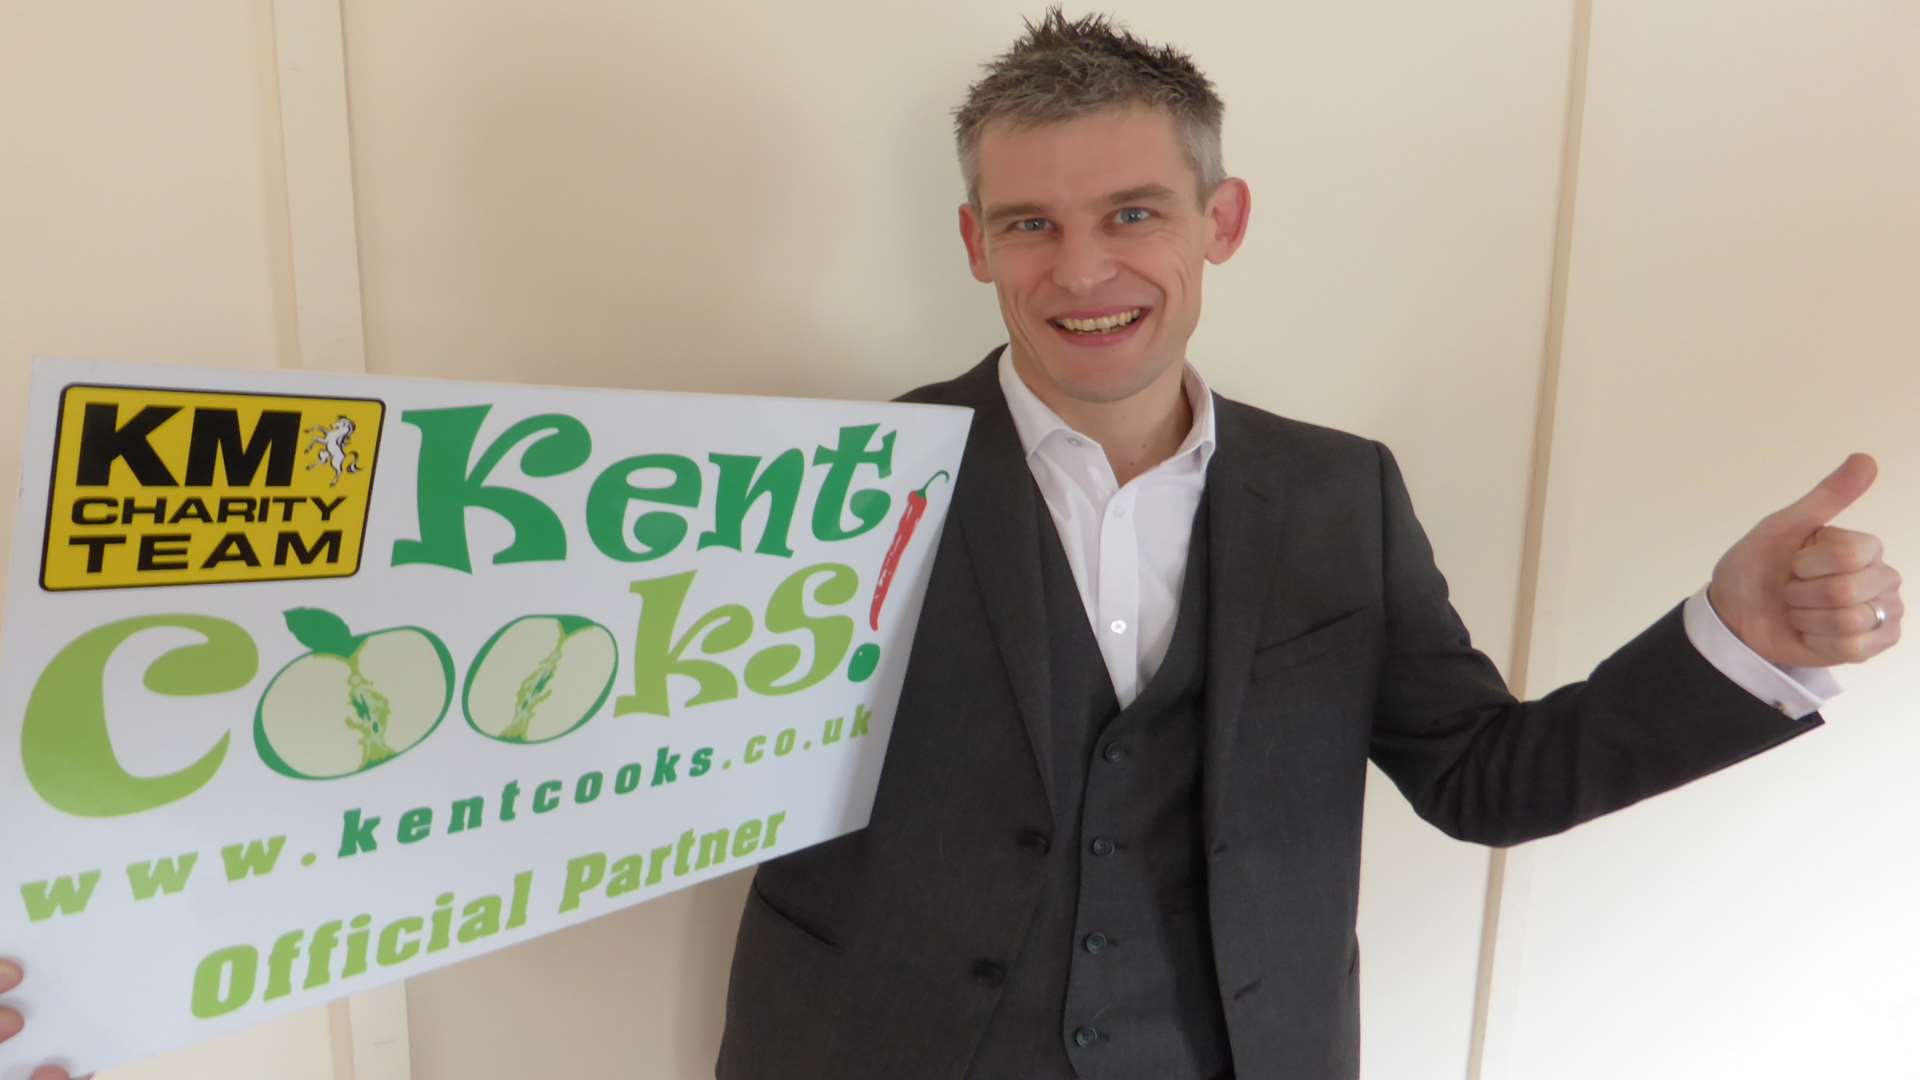 Darren Tutt, of FFK Catering Equipment Suppliers, Upchurch, announces support for annual school cookery contest Kent Cooks 2016